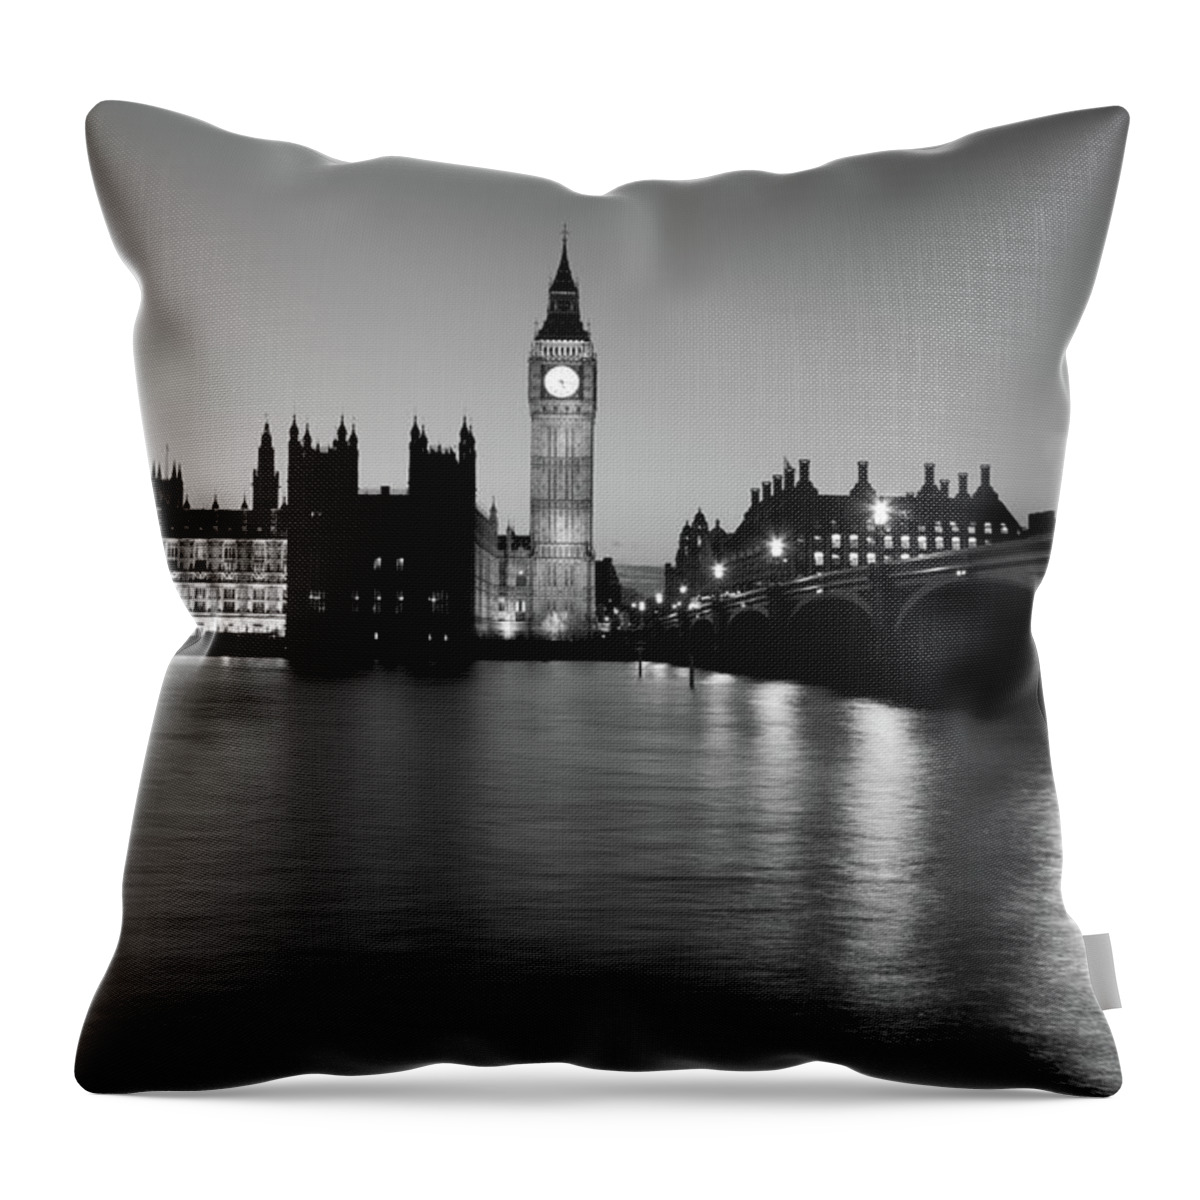 Gothic Style Throw Pillow featuring the photograph Houses Of Parliament In London, England by Davidcallan